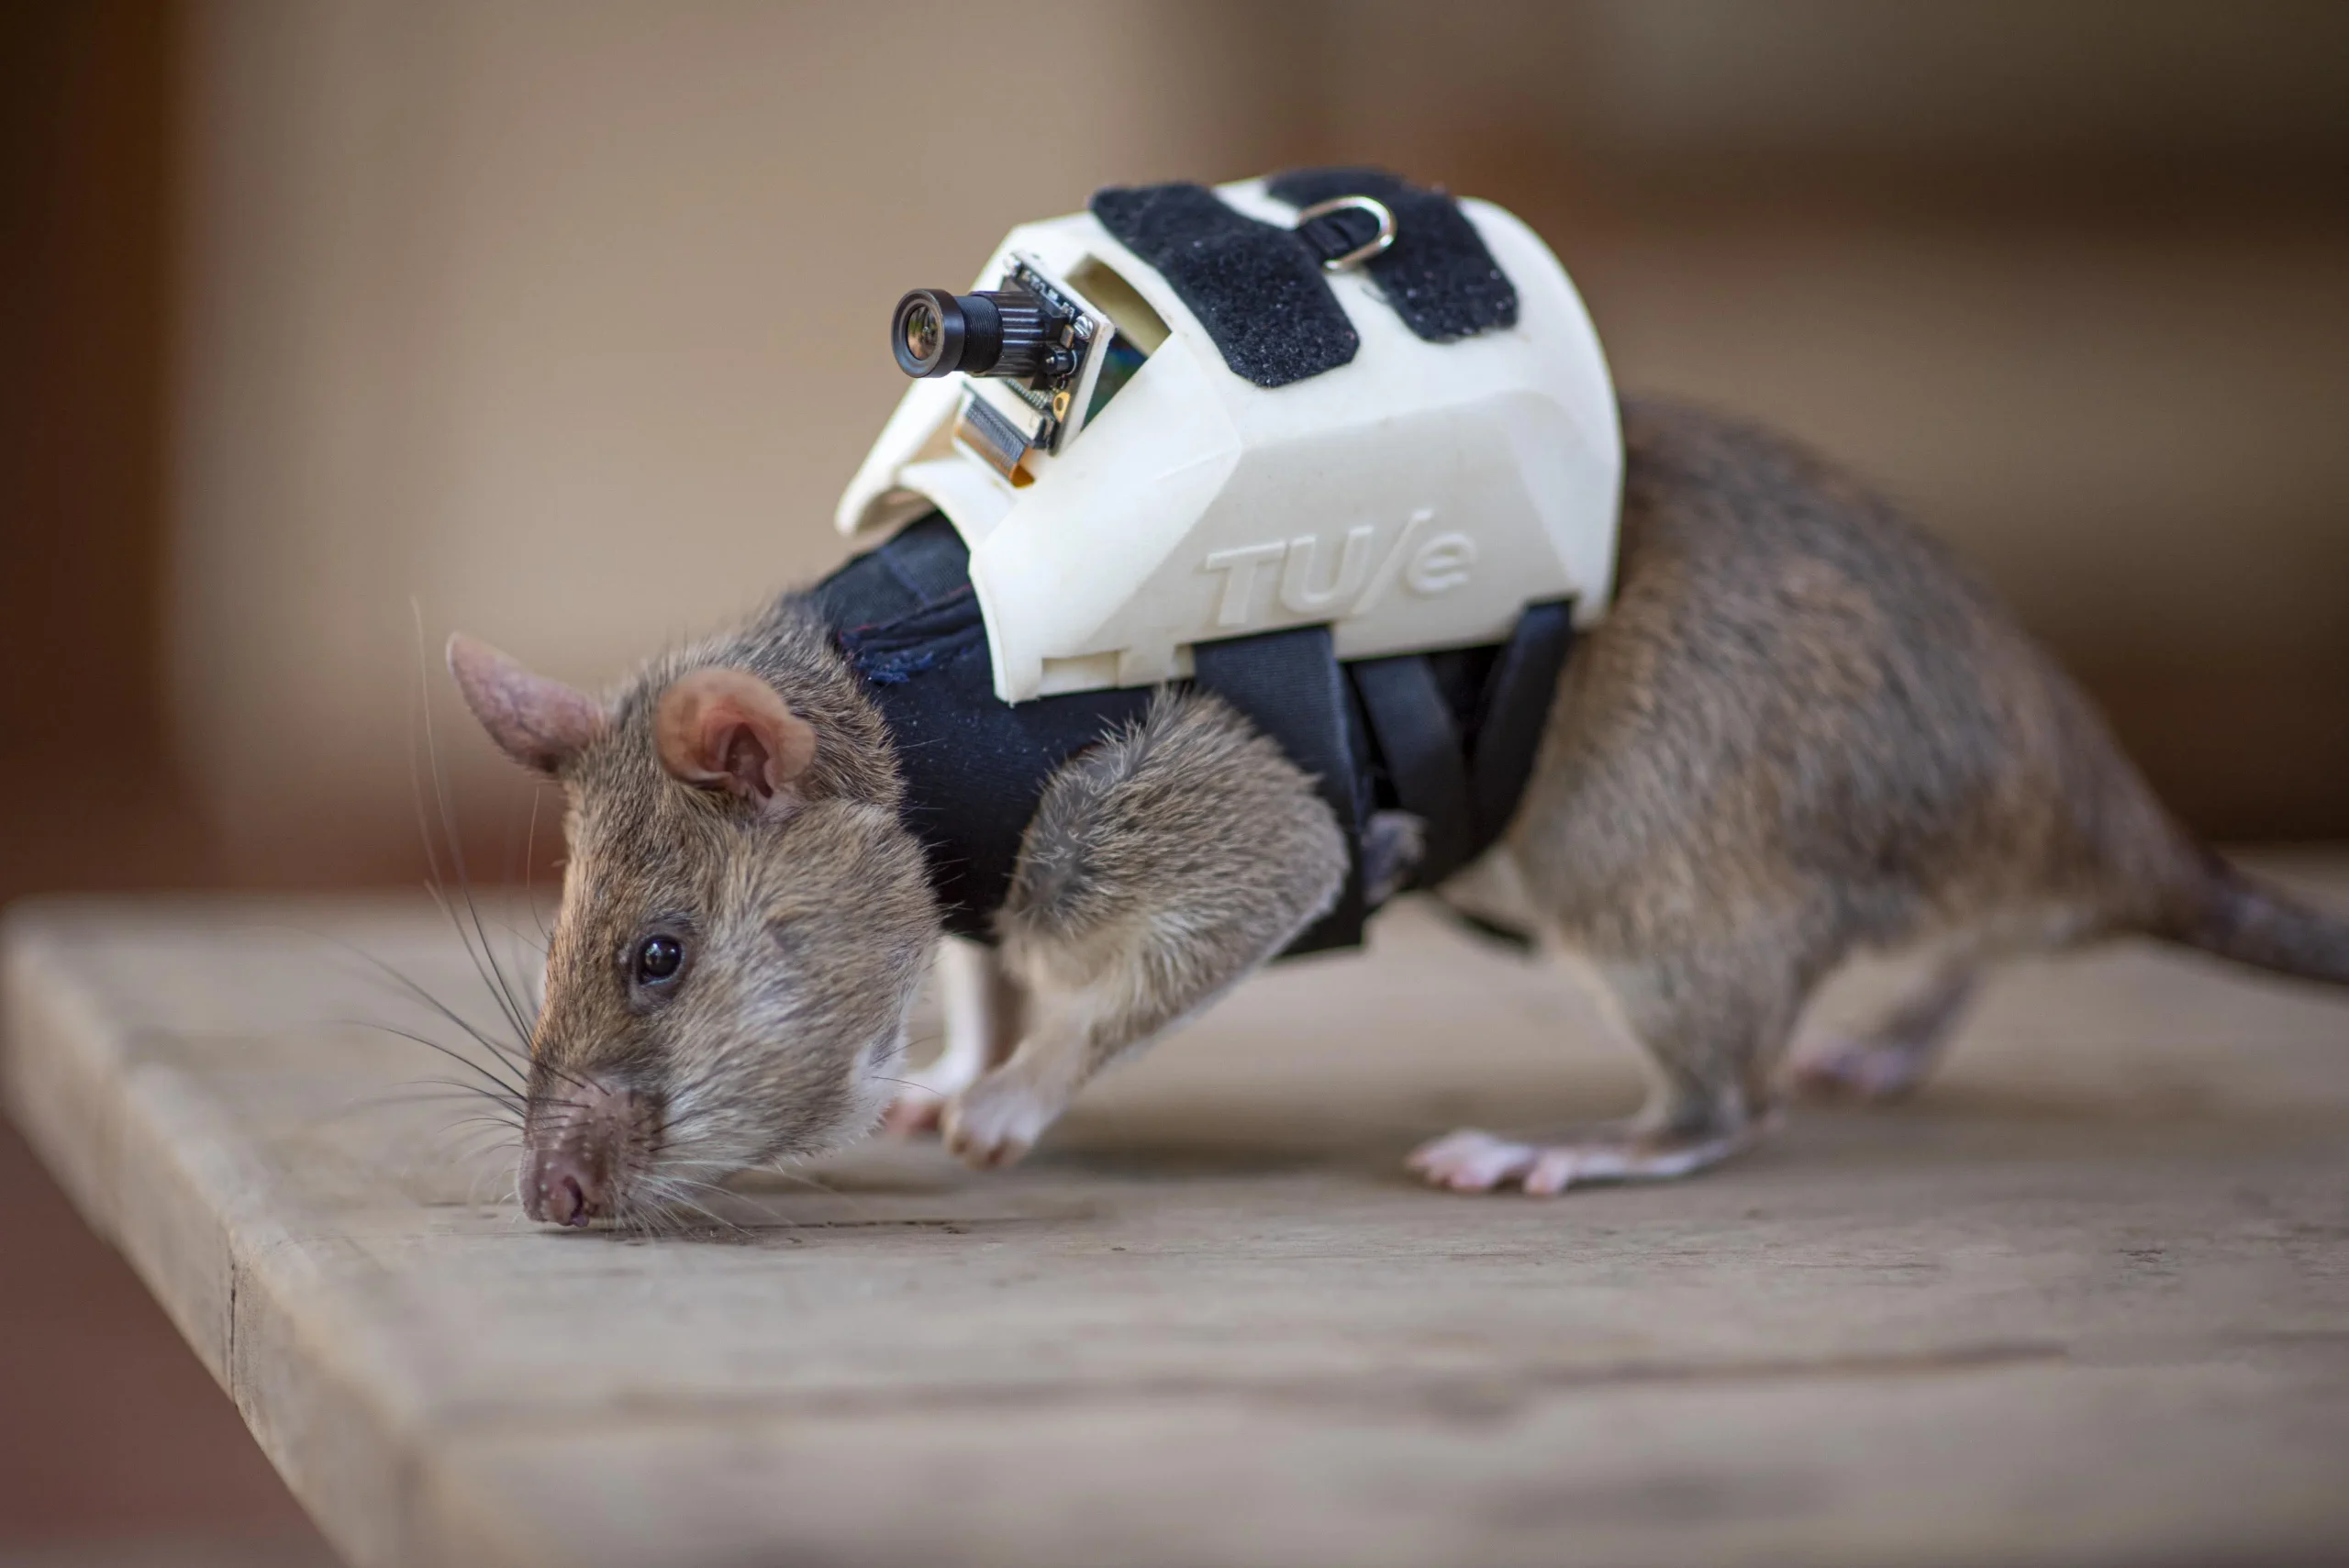 Dutch engineer designs backpack for earthquake rescue rats